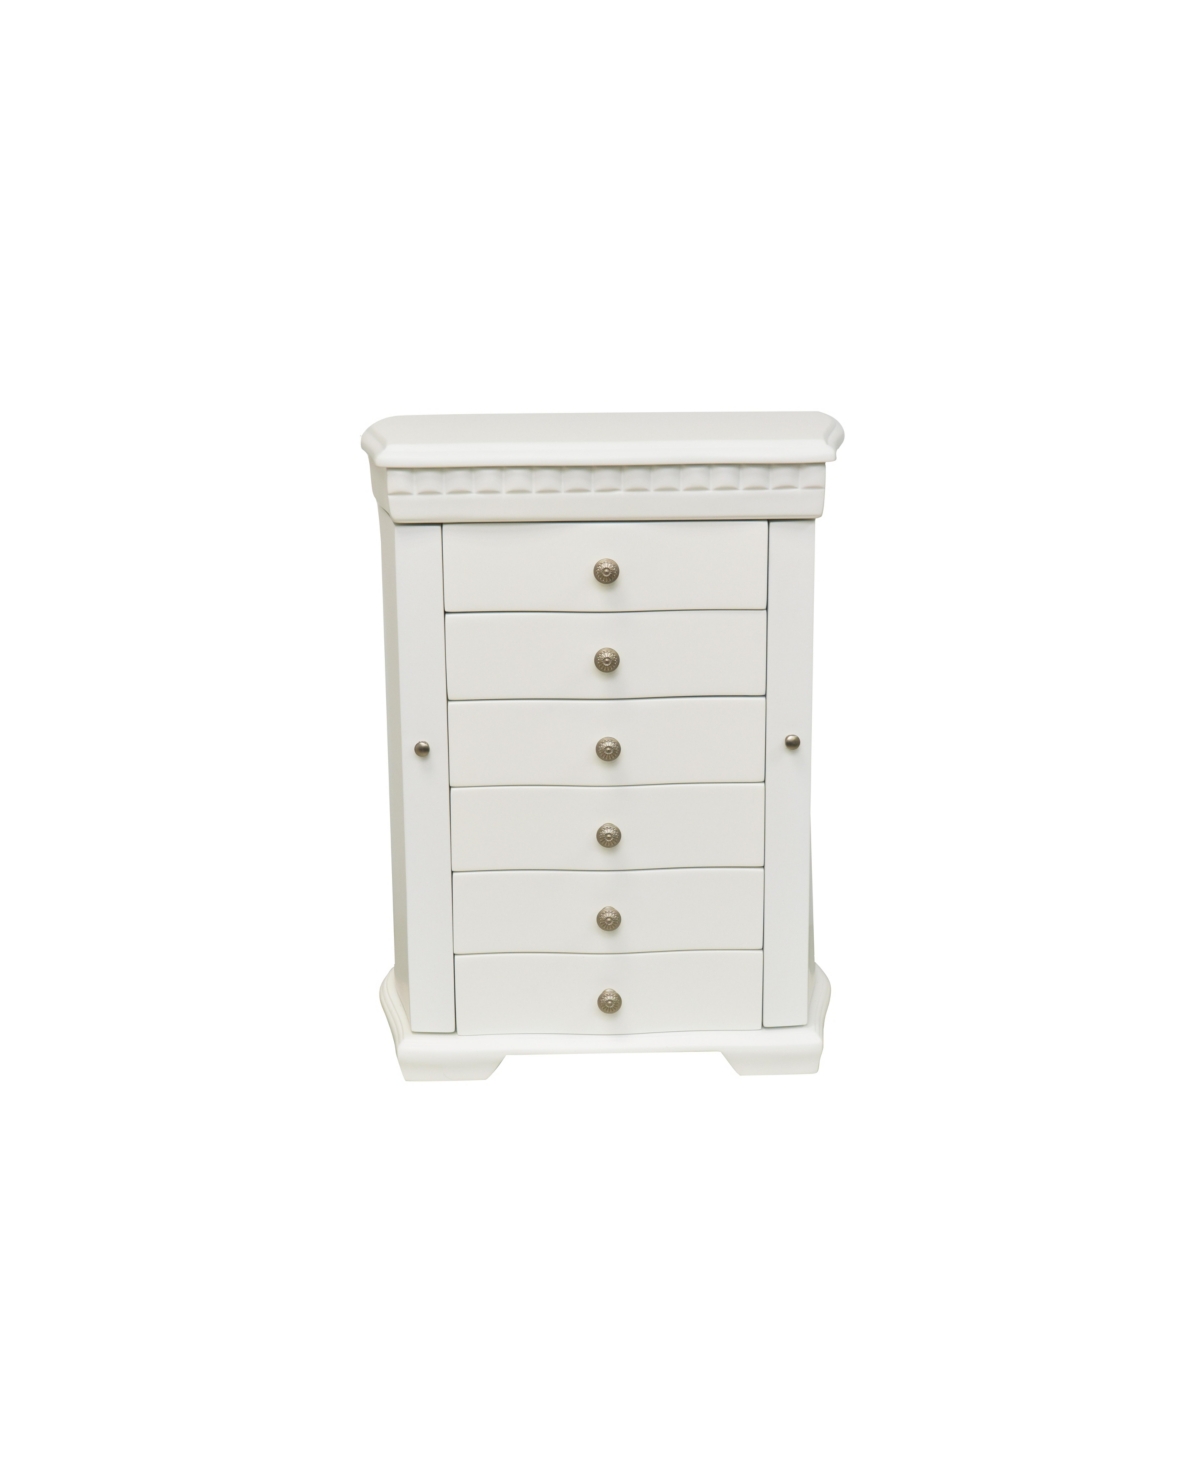 Traditional Large Jewelry Box - White